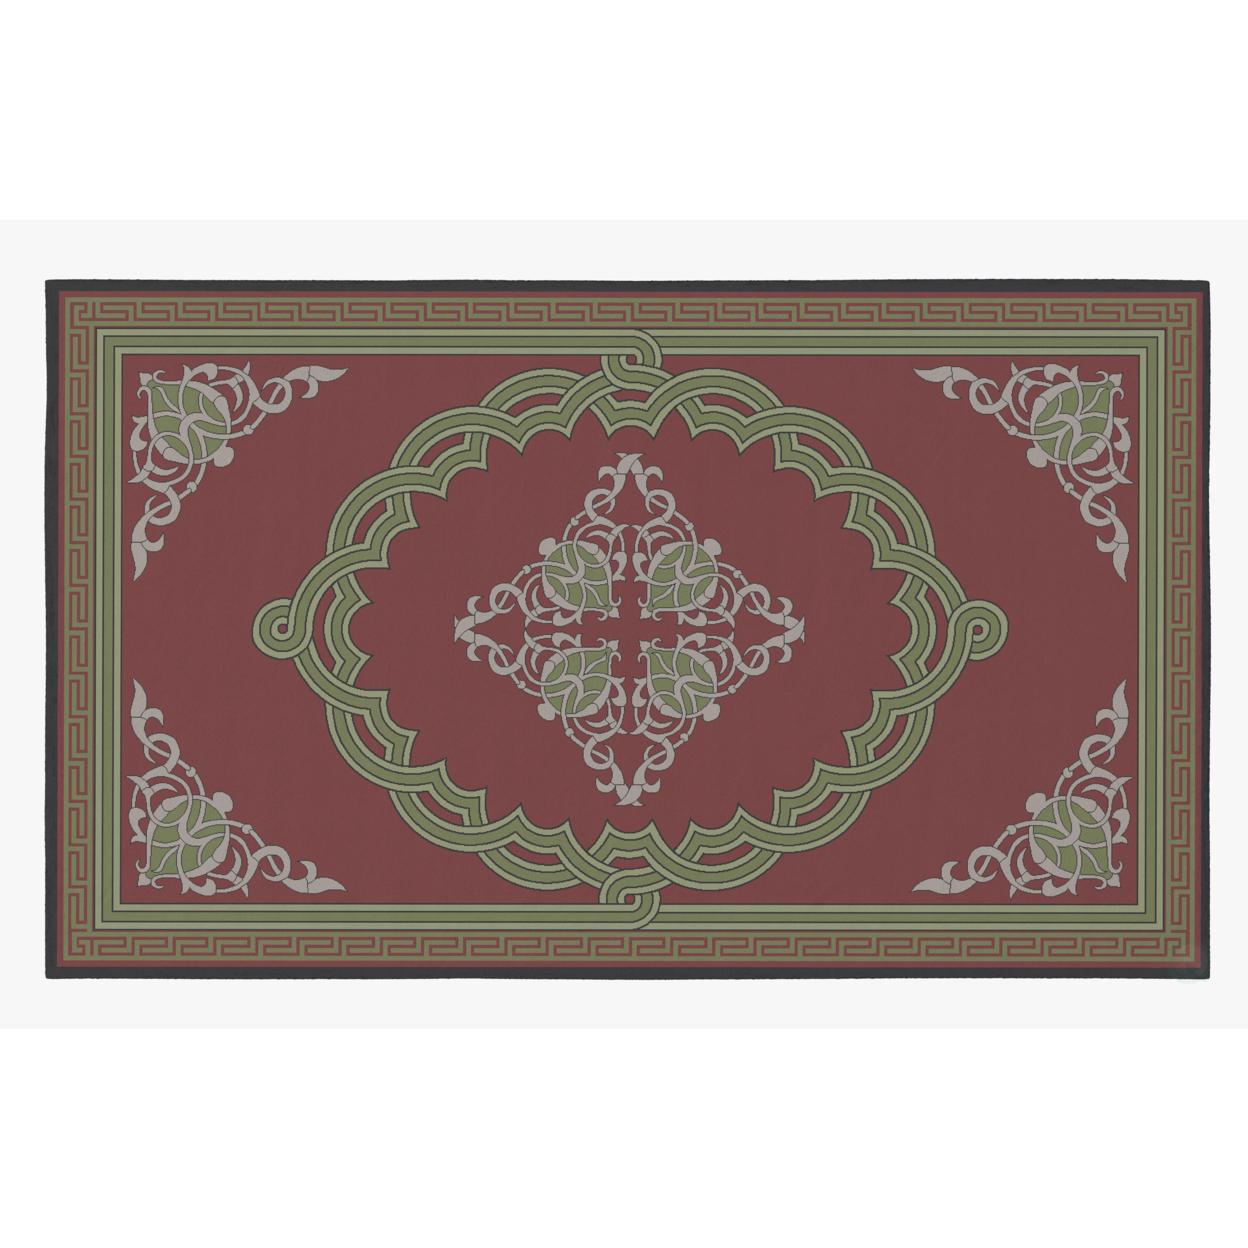 Deerlux Transitional Living Room Area Rug With Nonslip Backing, Red Medallion Pattern - 9 X 12